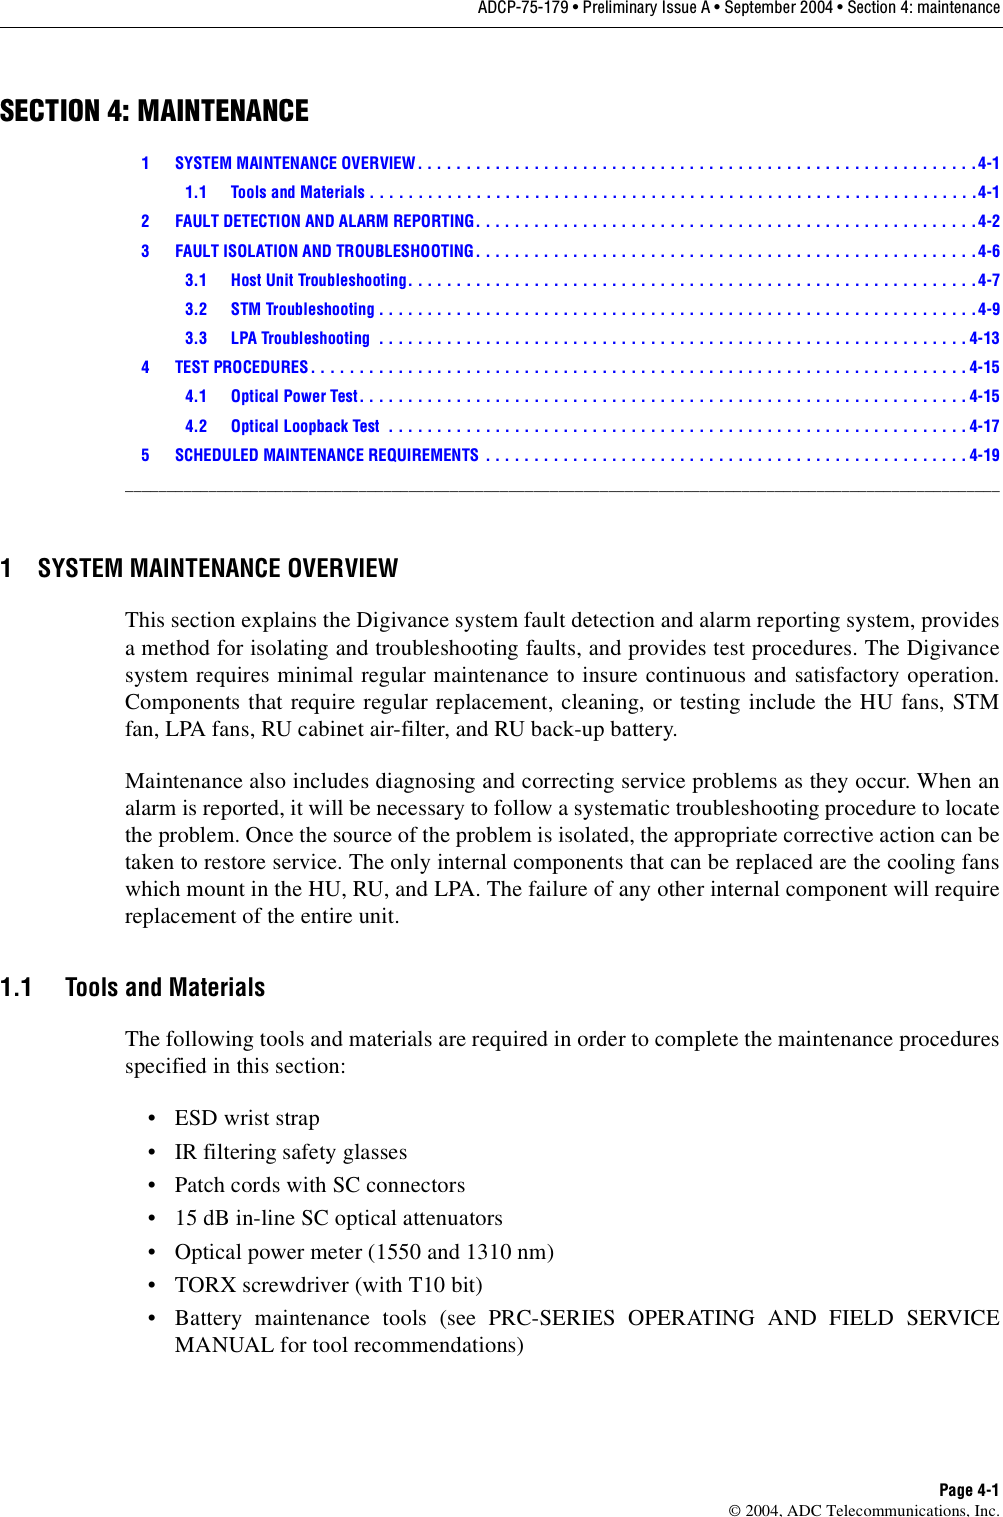 ADCP-75-179 • Preliminary Issue A • September 2004 • Section 4: maintenancePage 4-1© 2004, ADC Telecommunications, Inc.SECTION 4: MAINTENANCE1 SYSTEM MAINTENANCE OVERVIEW . . . . . . . . . . . . . . . . . . . . . . . . . . . . . . . . . . . . . . . . . . . . . . . . . . . . . . . . . .4-11.1 Tools and Materials . . . . . . . . . . . . . . . . . . . . . . . . . . . . . . . . . . . . . . . . . . . . . . . . . . . . . . . . . . . . . . .4-12 FAULT DETECTION AND ALARM REPORTING. . . . . . . . . . . . . . . . . . . . . . . . . . . . . . . . . . . . . . . . . . . . . . . . . . . .4-23 FAULT ISOLATION AND TROUBLESHOOTING. . . . . . . . . . . . . . . . . . . . . . . . . . . . . . . . . . . . . . . . . . . . . . . . . . . . 4-63.1 Host Unit Troubleshooting. . . . . . . . . . . . . . . . . . . . . . . . . . . . . . . . . . . . . . . . . . . . . . . . . . . . . . . . . . .4-73.2 STM Troubleshooting . . . . . . . . . . . . . . . . . . . . . . . . . . . . . . . . . . . . . . . . . . . . . . . . . . . . . . . . . . . . . .4-93.3 LPA Troubleshooting  . . . . . . . . . . . . . . . . . . . . . . . . . . . . . . . . . . . . . . . . . . . . . . . . . . . . . . . . . . . . . 4-134 TEST PROCEDURES. . . . . . . . . . . . . . . . . . . . . . . . . . . . . . . . . . . . . . . . . . . . . . . . . . . . . . . . . . . . . . . . . . . . 4-154.1 Optical Power Test. . . . . . . . . . . . . . . . . . . . . . . . . . . . . . . . . . . . . . . . . . . . . . . . . . . . . . . . . . . . . . . 4-154.2 Optical Loopback Test  . . . . . . . . . . . . . . . . . . . . . . . . . . . . . . . . . . . . . . . . . . . . . . . . . . . . . . . . . . . . 4-175 SCHEDULED MAINTENANCE REQUIREMENTS  . . . . . . . . . . . . . . . . . . . . . . . . . . . . . . . . . . . . . . . . . . . . . . . . . . 4-19_________________________________________________________________________________________________________1 SYSTEM MAINTENANCE OVERVIEWThis section explains the Digivance system fault detection and alarm reporting system, providesa method for isolating and troubleshooting faults, and provides test procedures. The Digivancesystem requires minimal regular maintenance to insure continuous and satisfactory operation.Components that require regular replacement, cleaning, or testing include the HU fans, STMfan, LPA fans, RU cabinet air-filter, and RU back-up battery.Maintenance also includes diagnosing and correcting service problems as they occur. When analarm is reported, it will be necessary to follow a systematic troubleshooting procedure to locatethe problem. Once the source of the problem is isolated, the appropriate corrective action can betaken to restore service. The only internal components that can be replaced are the cooling fanswhich mount in the HU, RU, and LPA. The failure of any other internal component will requirereplacement of the entire unit. 1.1 Tools and MaterialsThe following tools and materials are required in order to complete the maintenance proceduresspecified in this section: •ESD wrist strap• IR filtering safety glasses• Patch cords with SC connectors• 15 dB in-line SC optical attenuators• Optical power meter (1550 and 1310 nm)• TORX screwdriver (with T10 bit)• Battery maintenance tools (see PRC-SERIES OPERATING AND FIELD SERVICEMANUAL for tool recommendations)